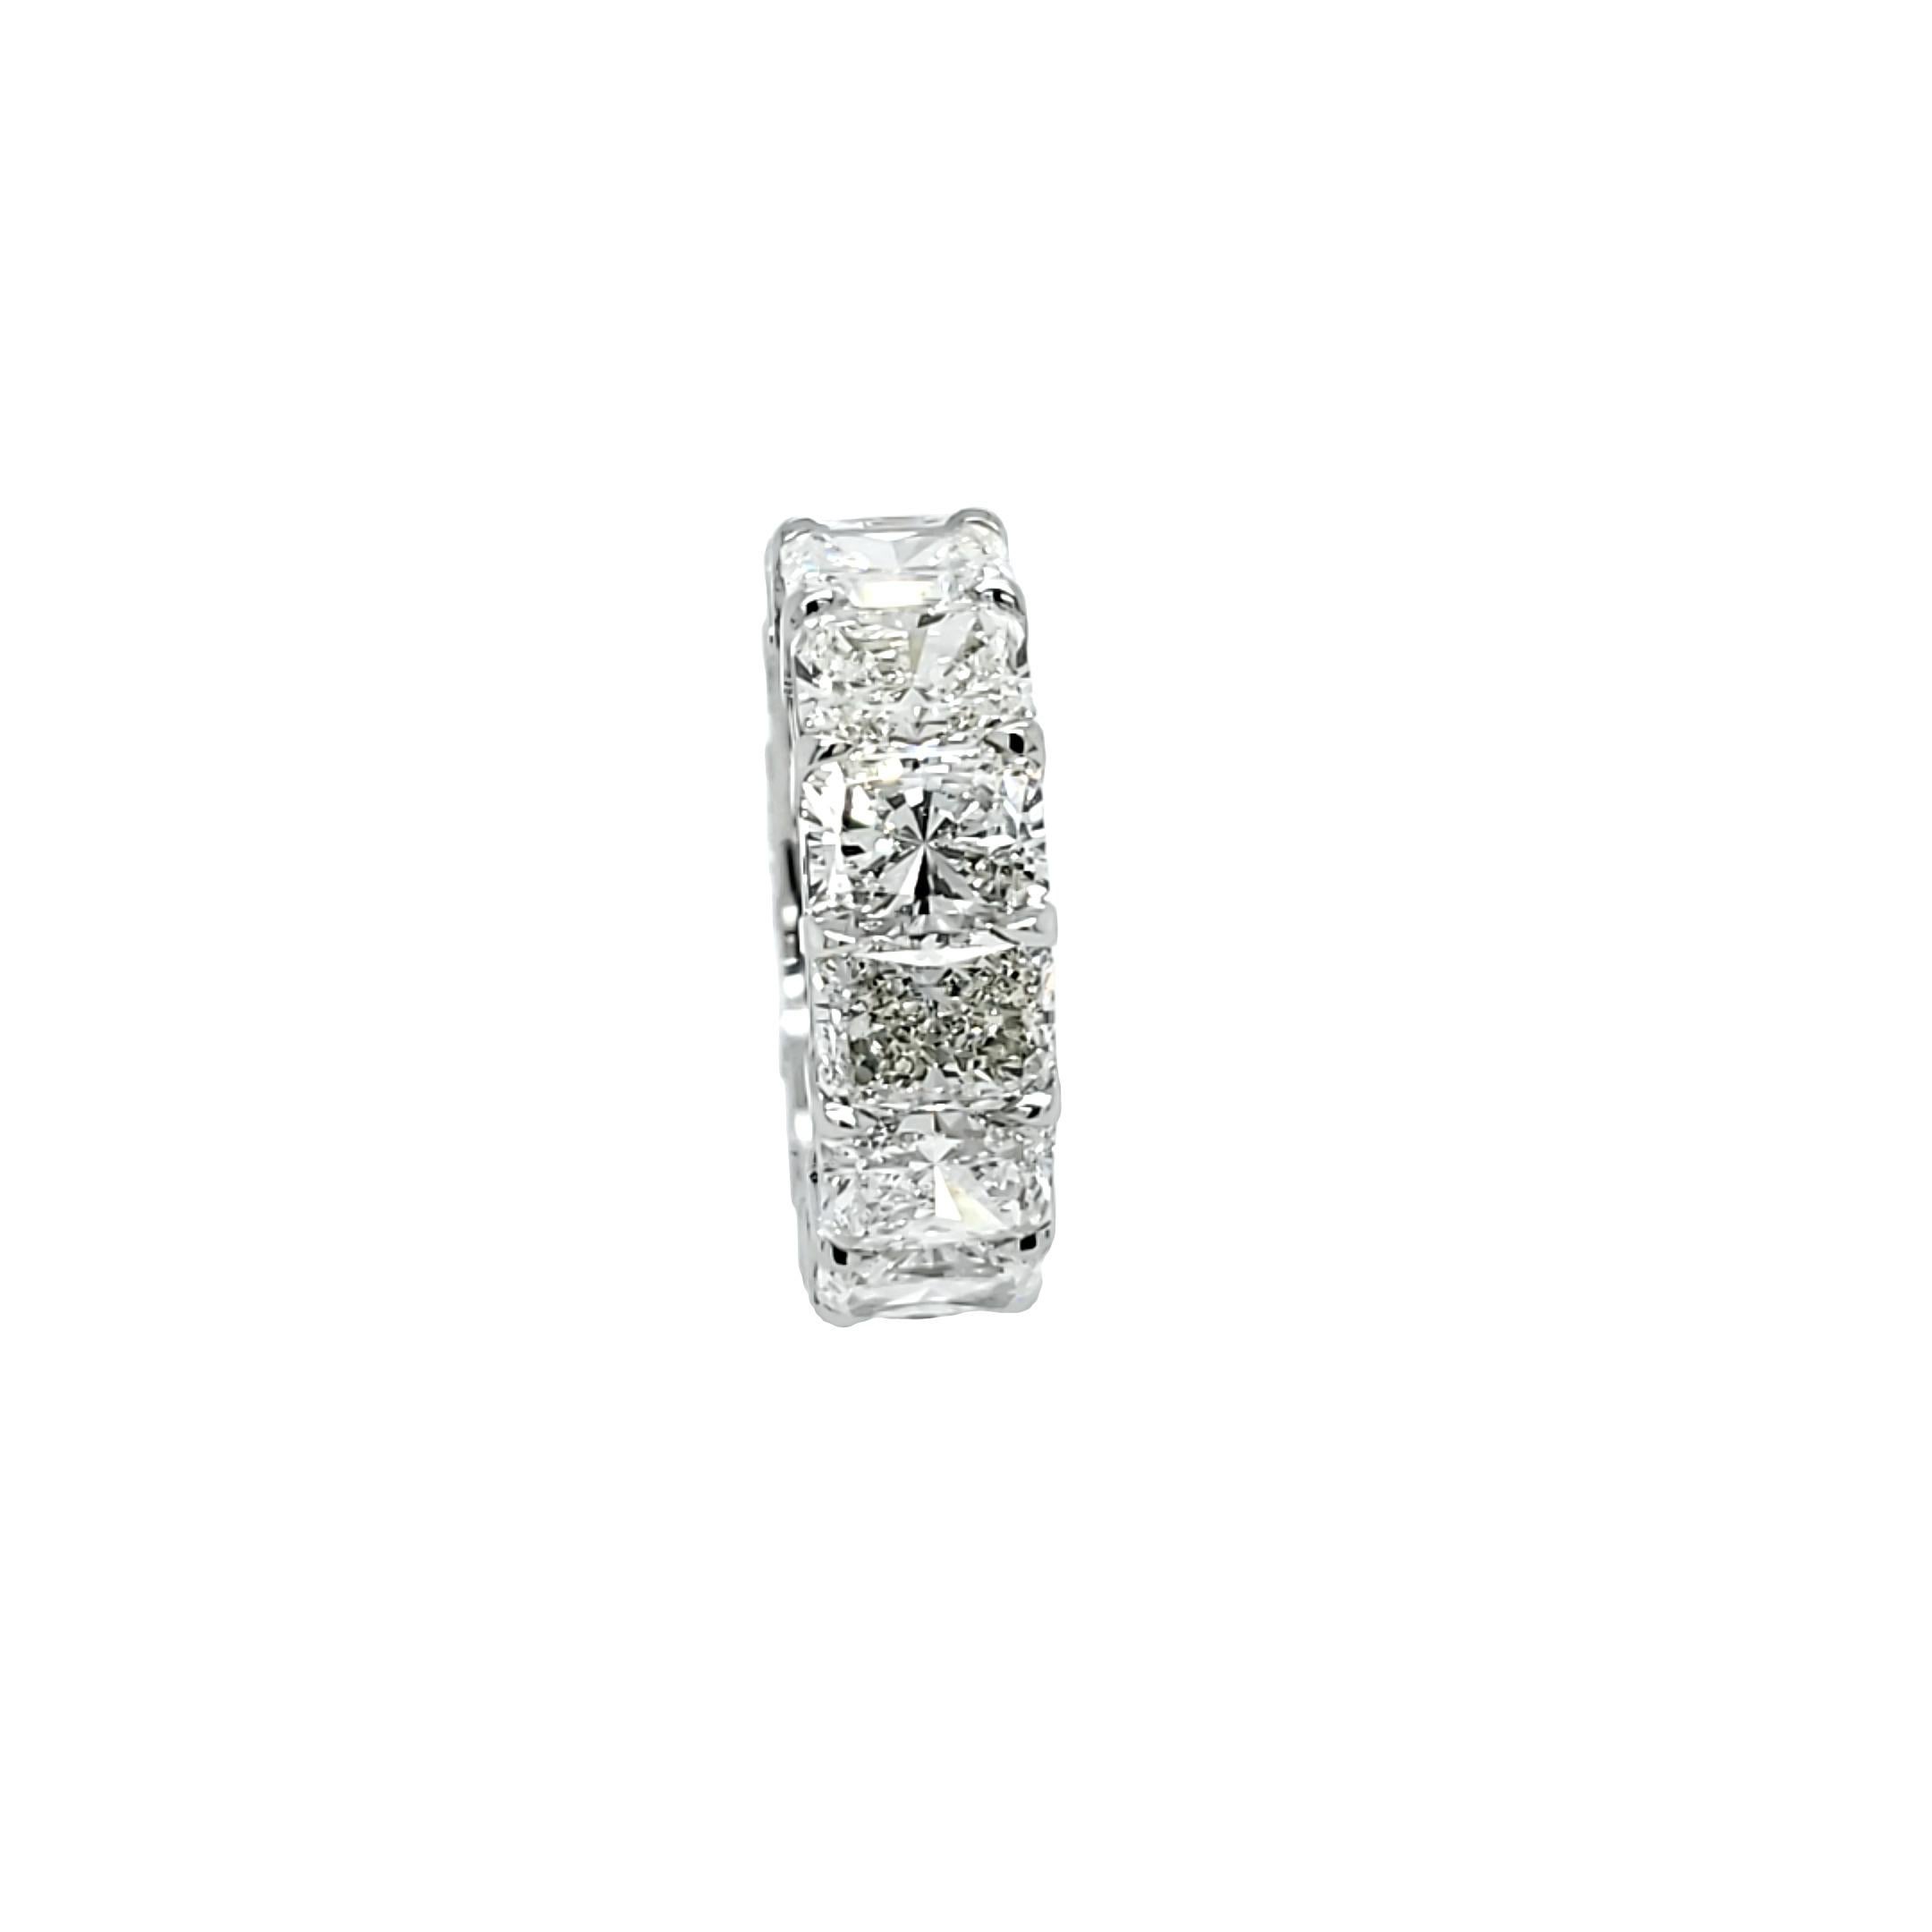 Rosenberg Diamonds & Co. 14.17 total carat weight Radiant cut diamond eternity band. This beautiful platinum airline eternity band has fourteen elongated radiant cut diamonds ranging from G-I in color SI2-VS1 in clarity with an average of just over